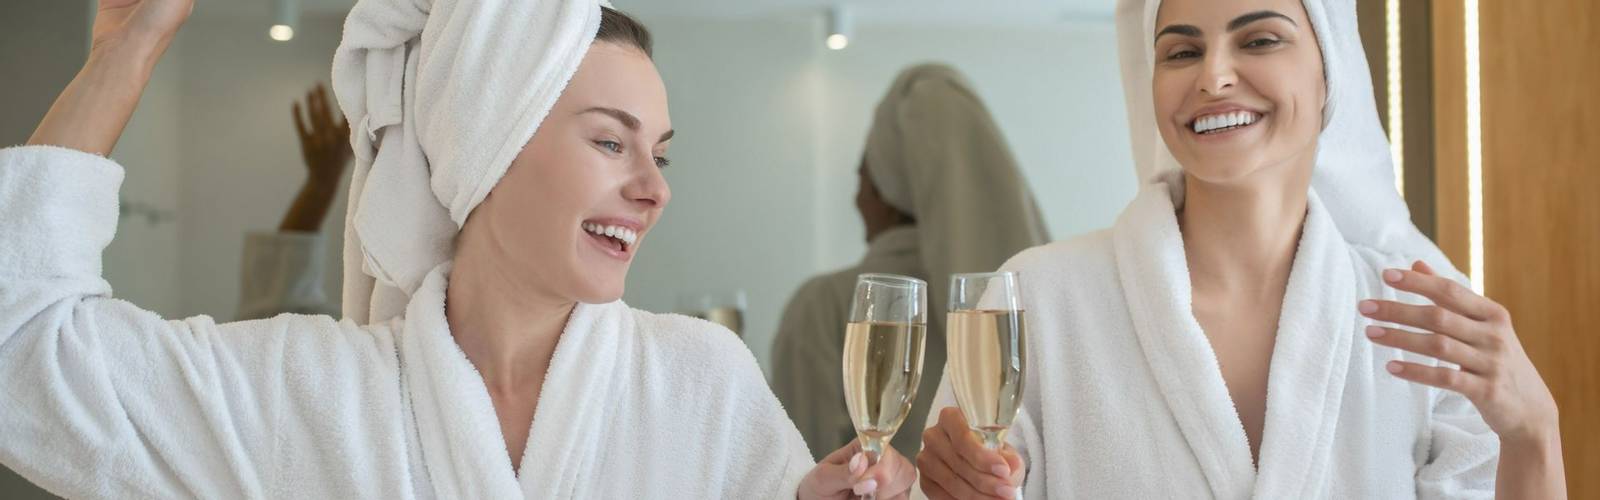 Spa weekend. Two pretty girls in white robes drinking champagne and enjoying